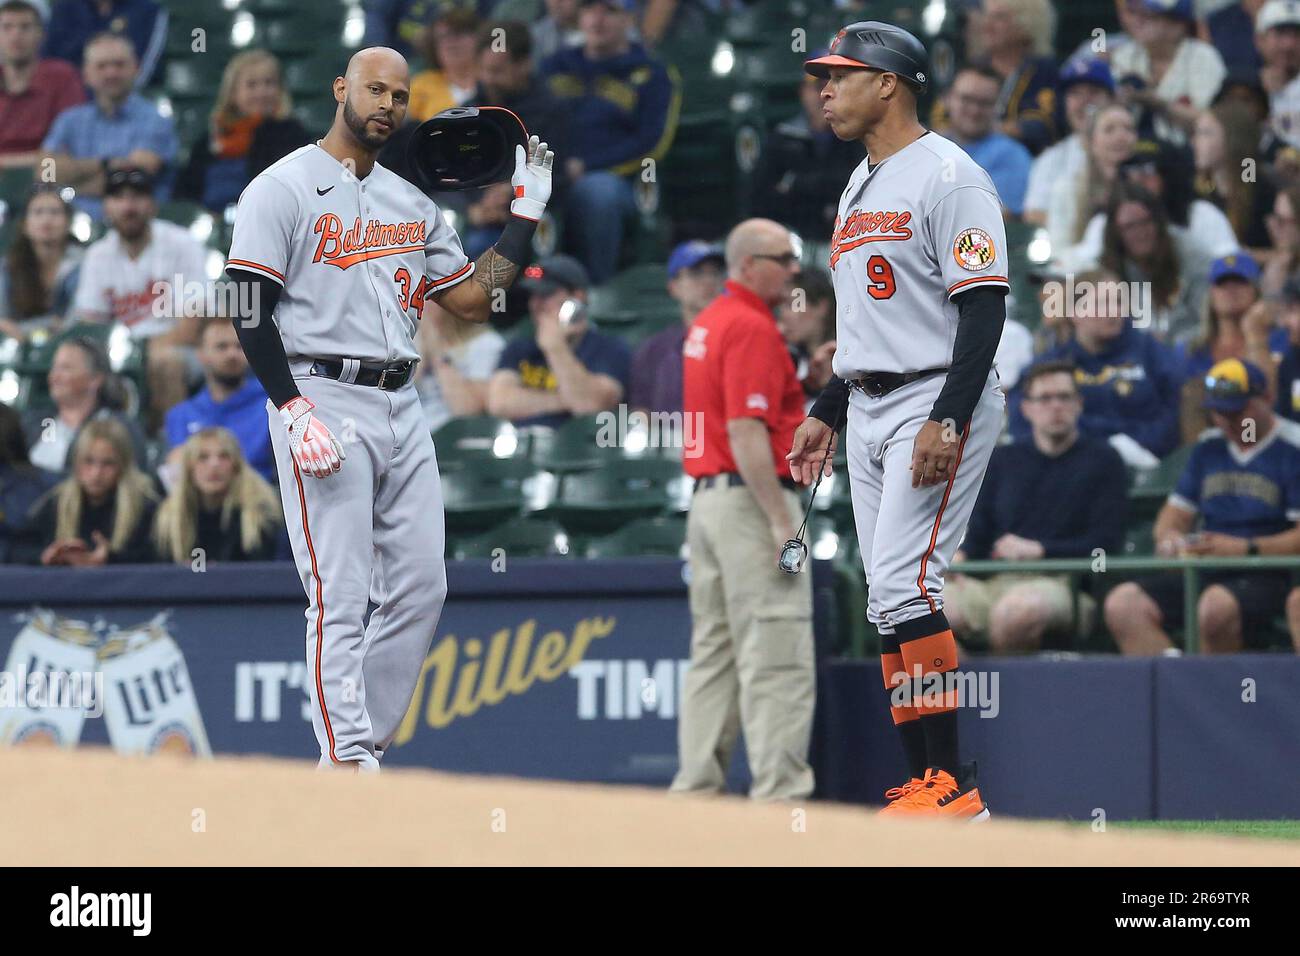 MILWAUKEE, WI - JUNE 07: Baltimore Orioles left fielder Aaron Hicks (34)  tosses his helmet after getting called out during a game between the  Milwaukee Brewers and the Baltimore Orioles on June